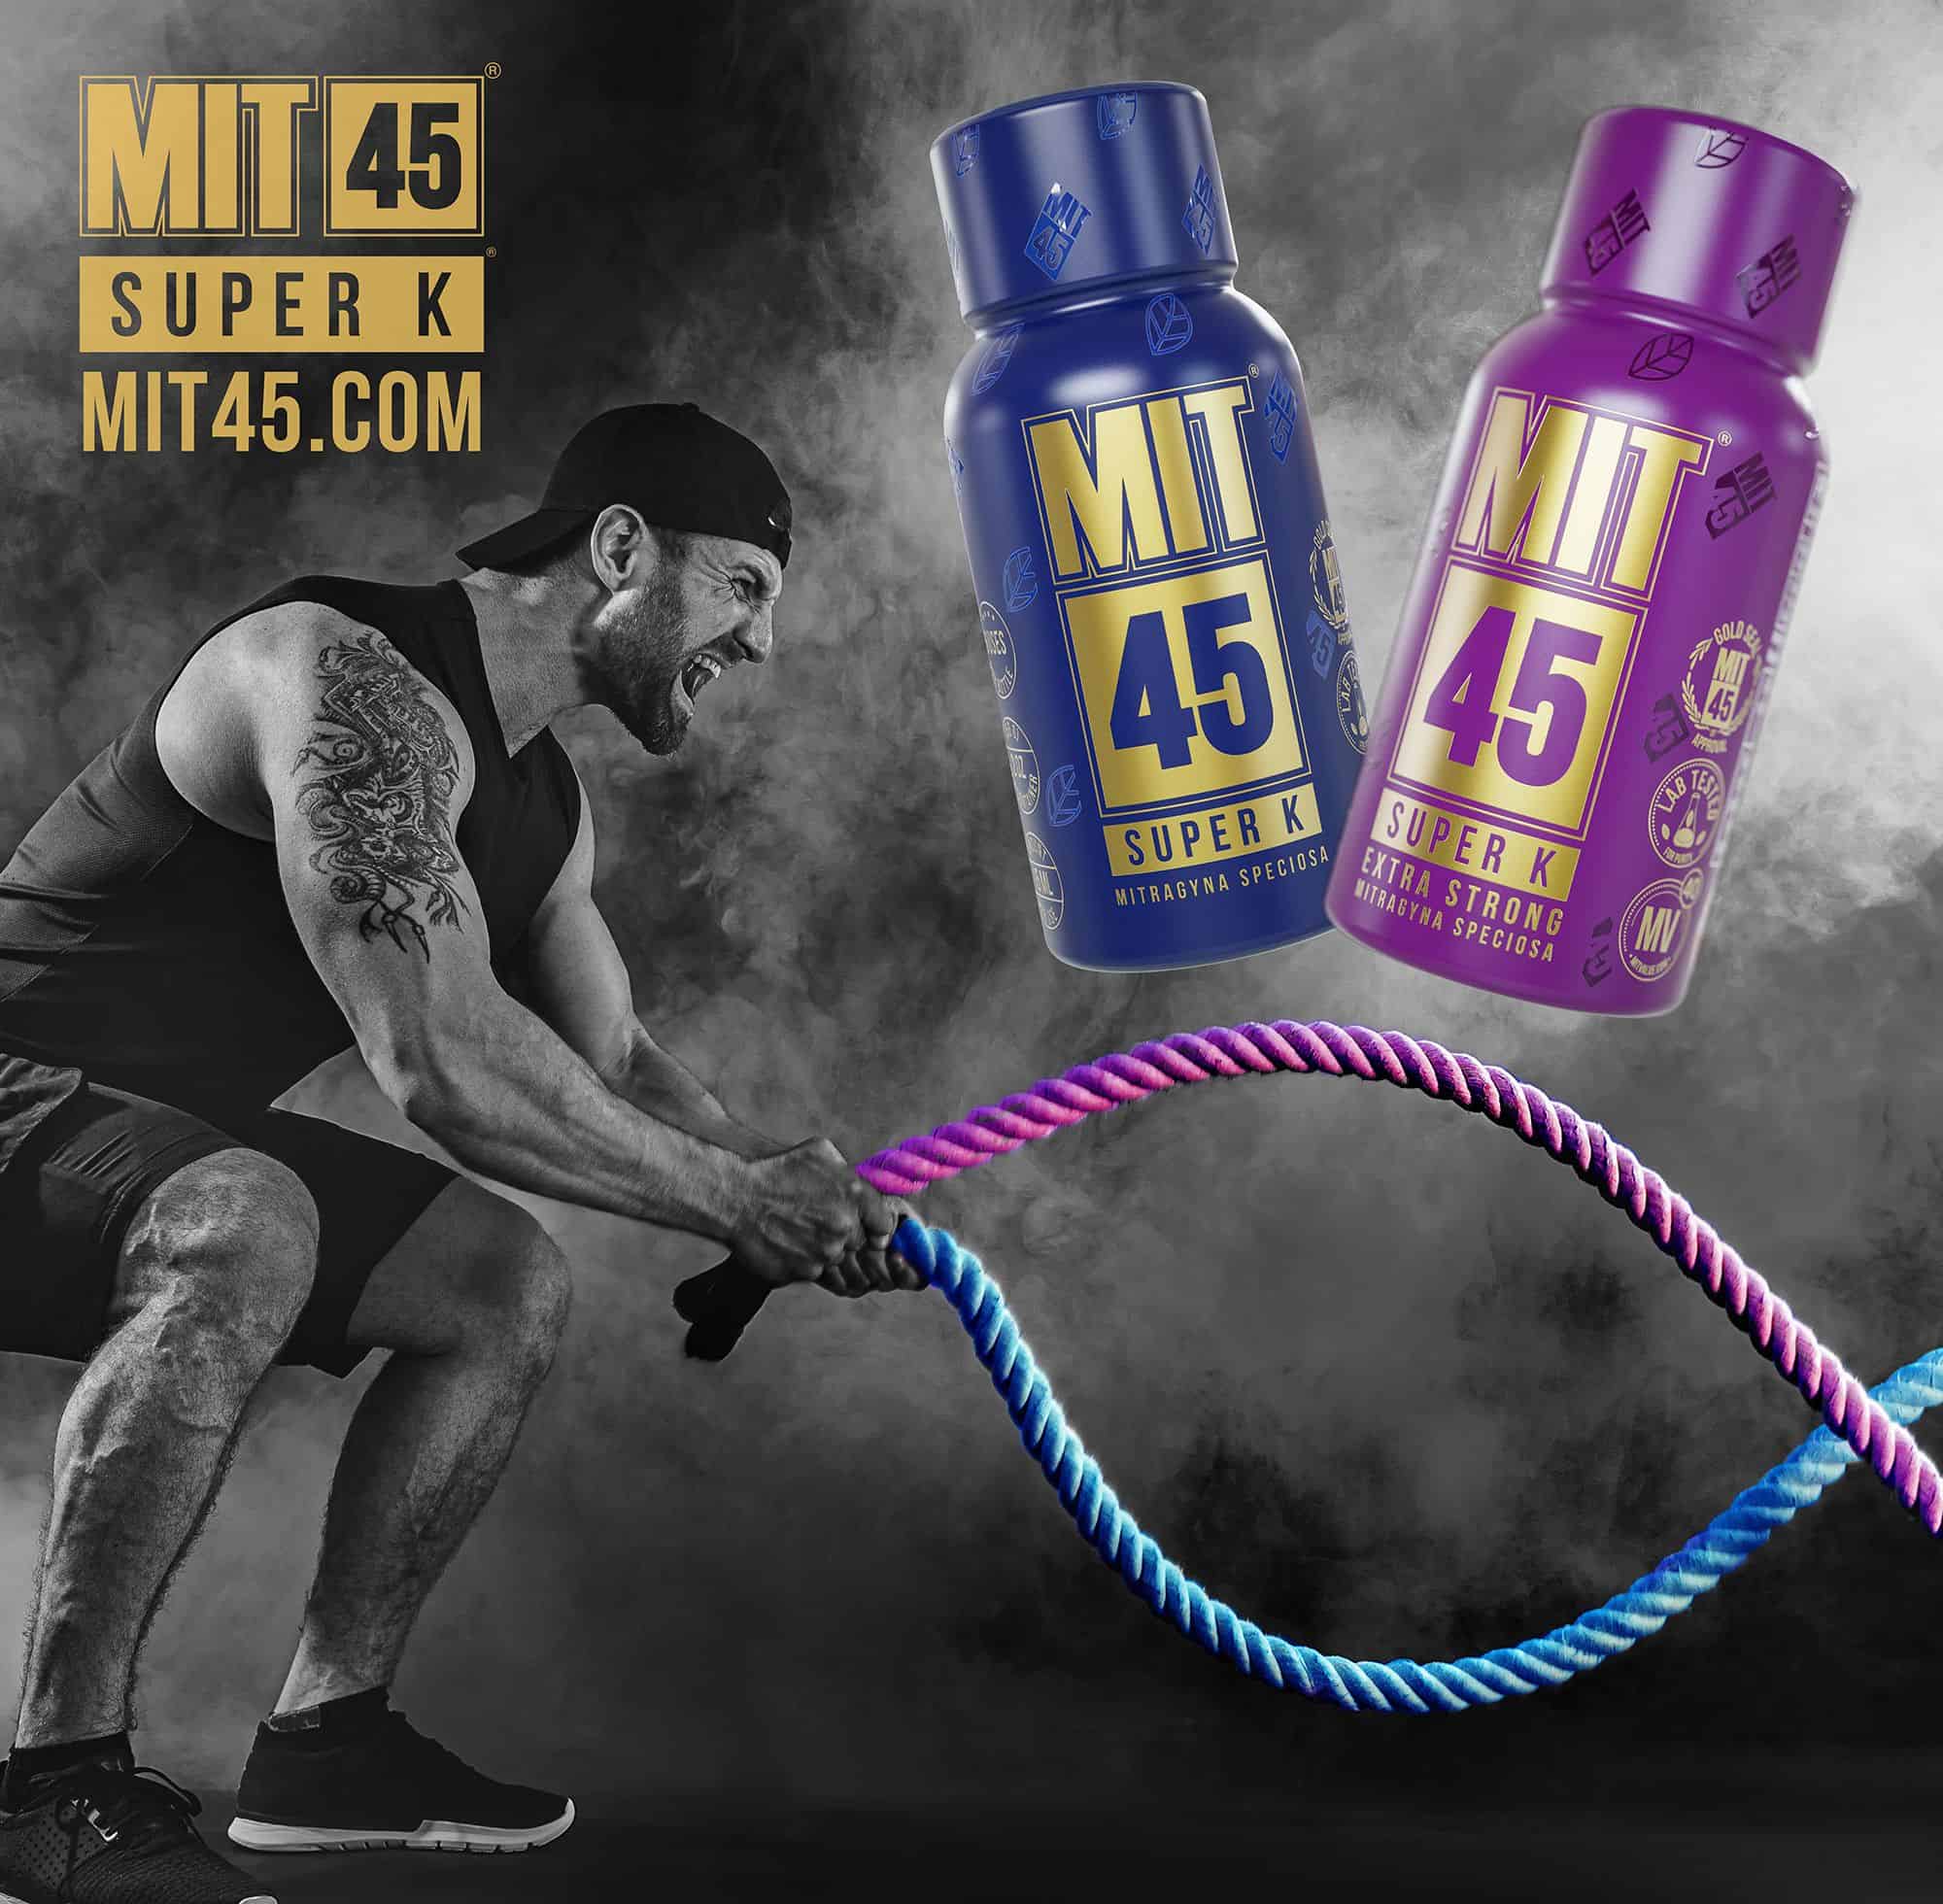 SUPER K AND MIT45 TO COMBINE THEIR POWERS AND REBRAND UNDER MIT45